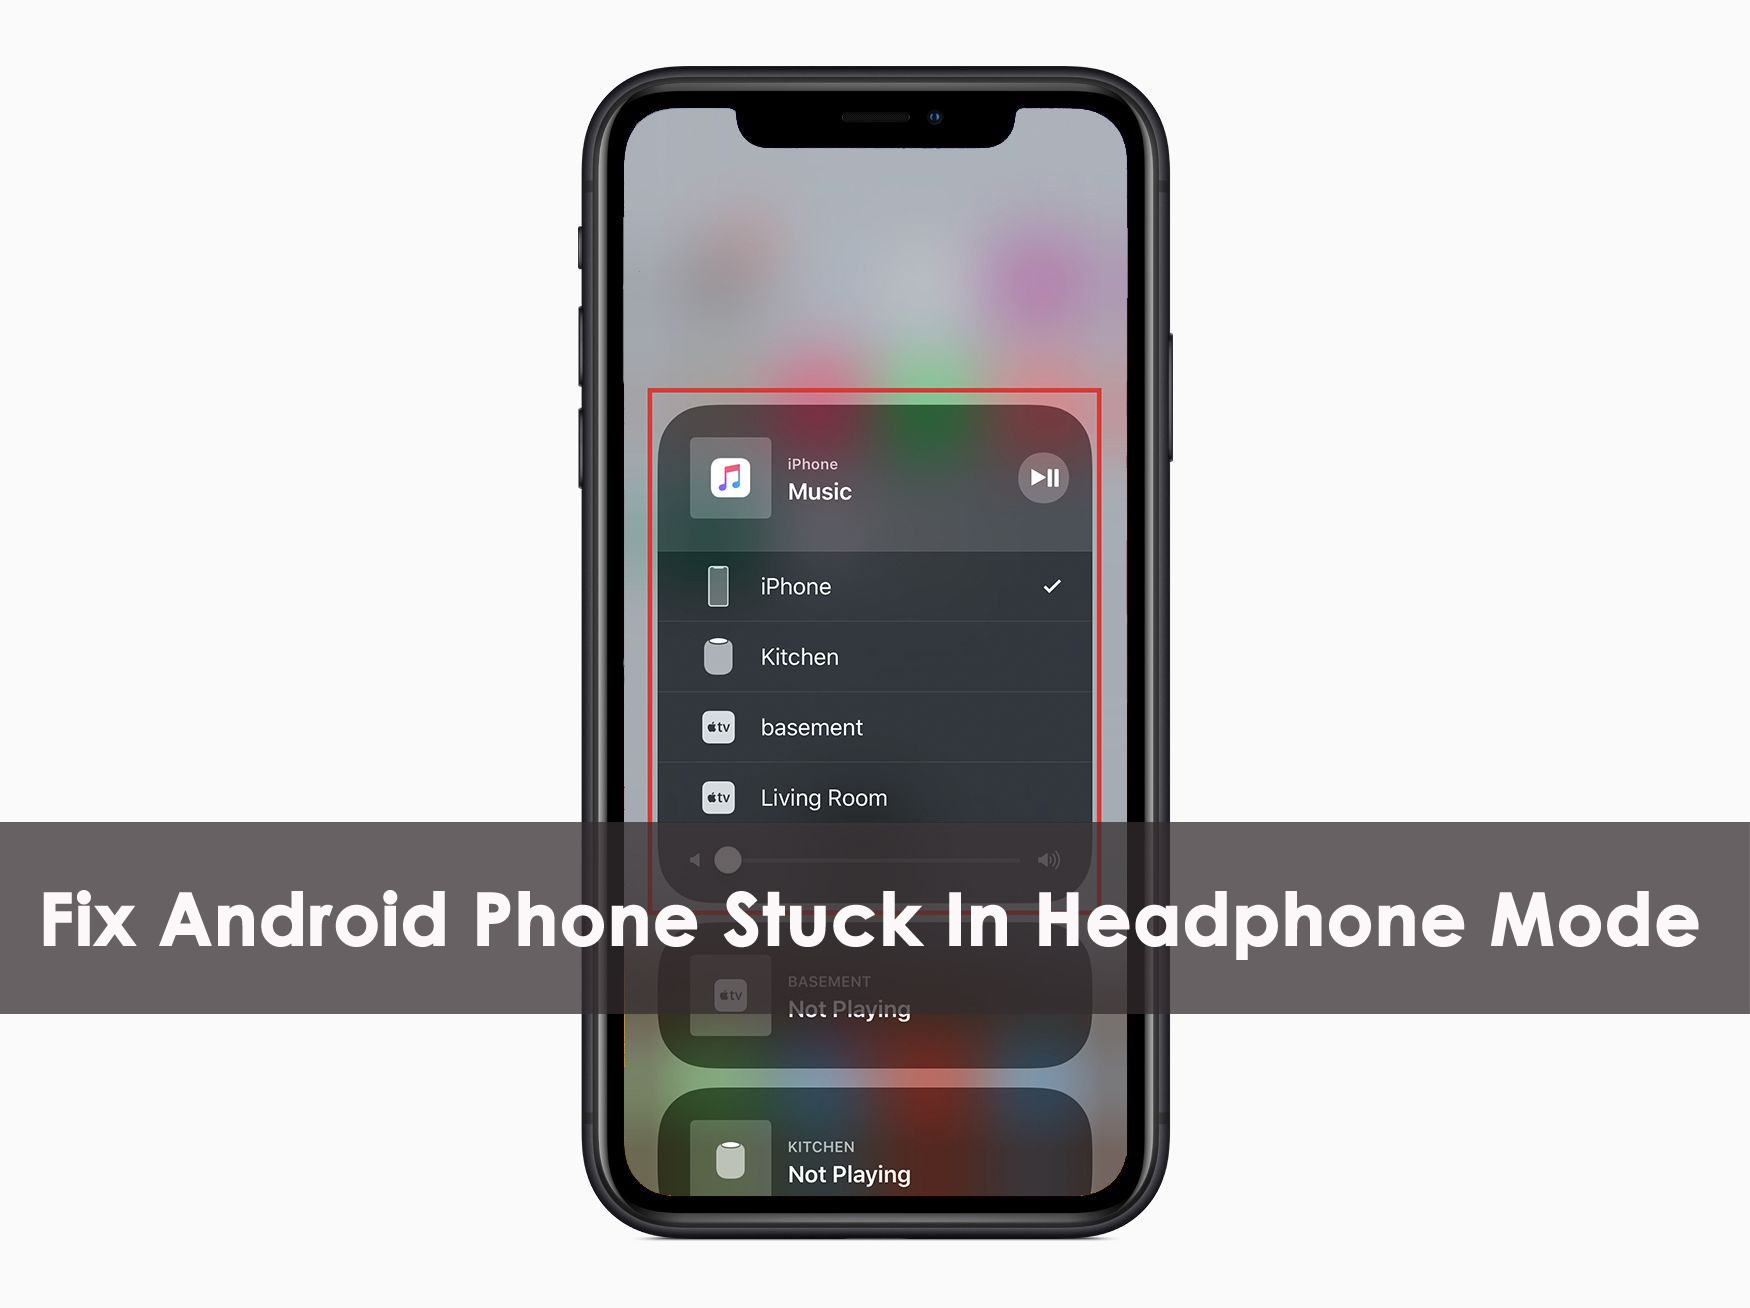 9 Methods To Fix Android Phone Stuck In Headphone Mode